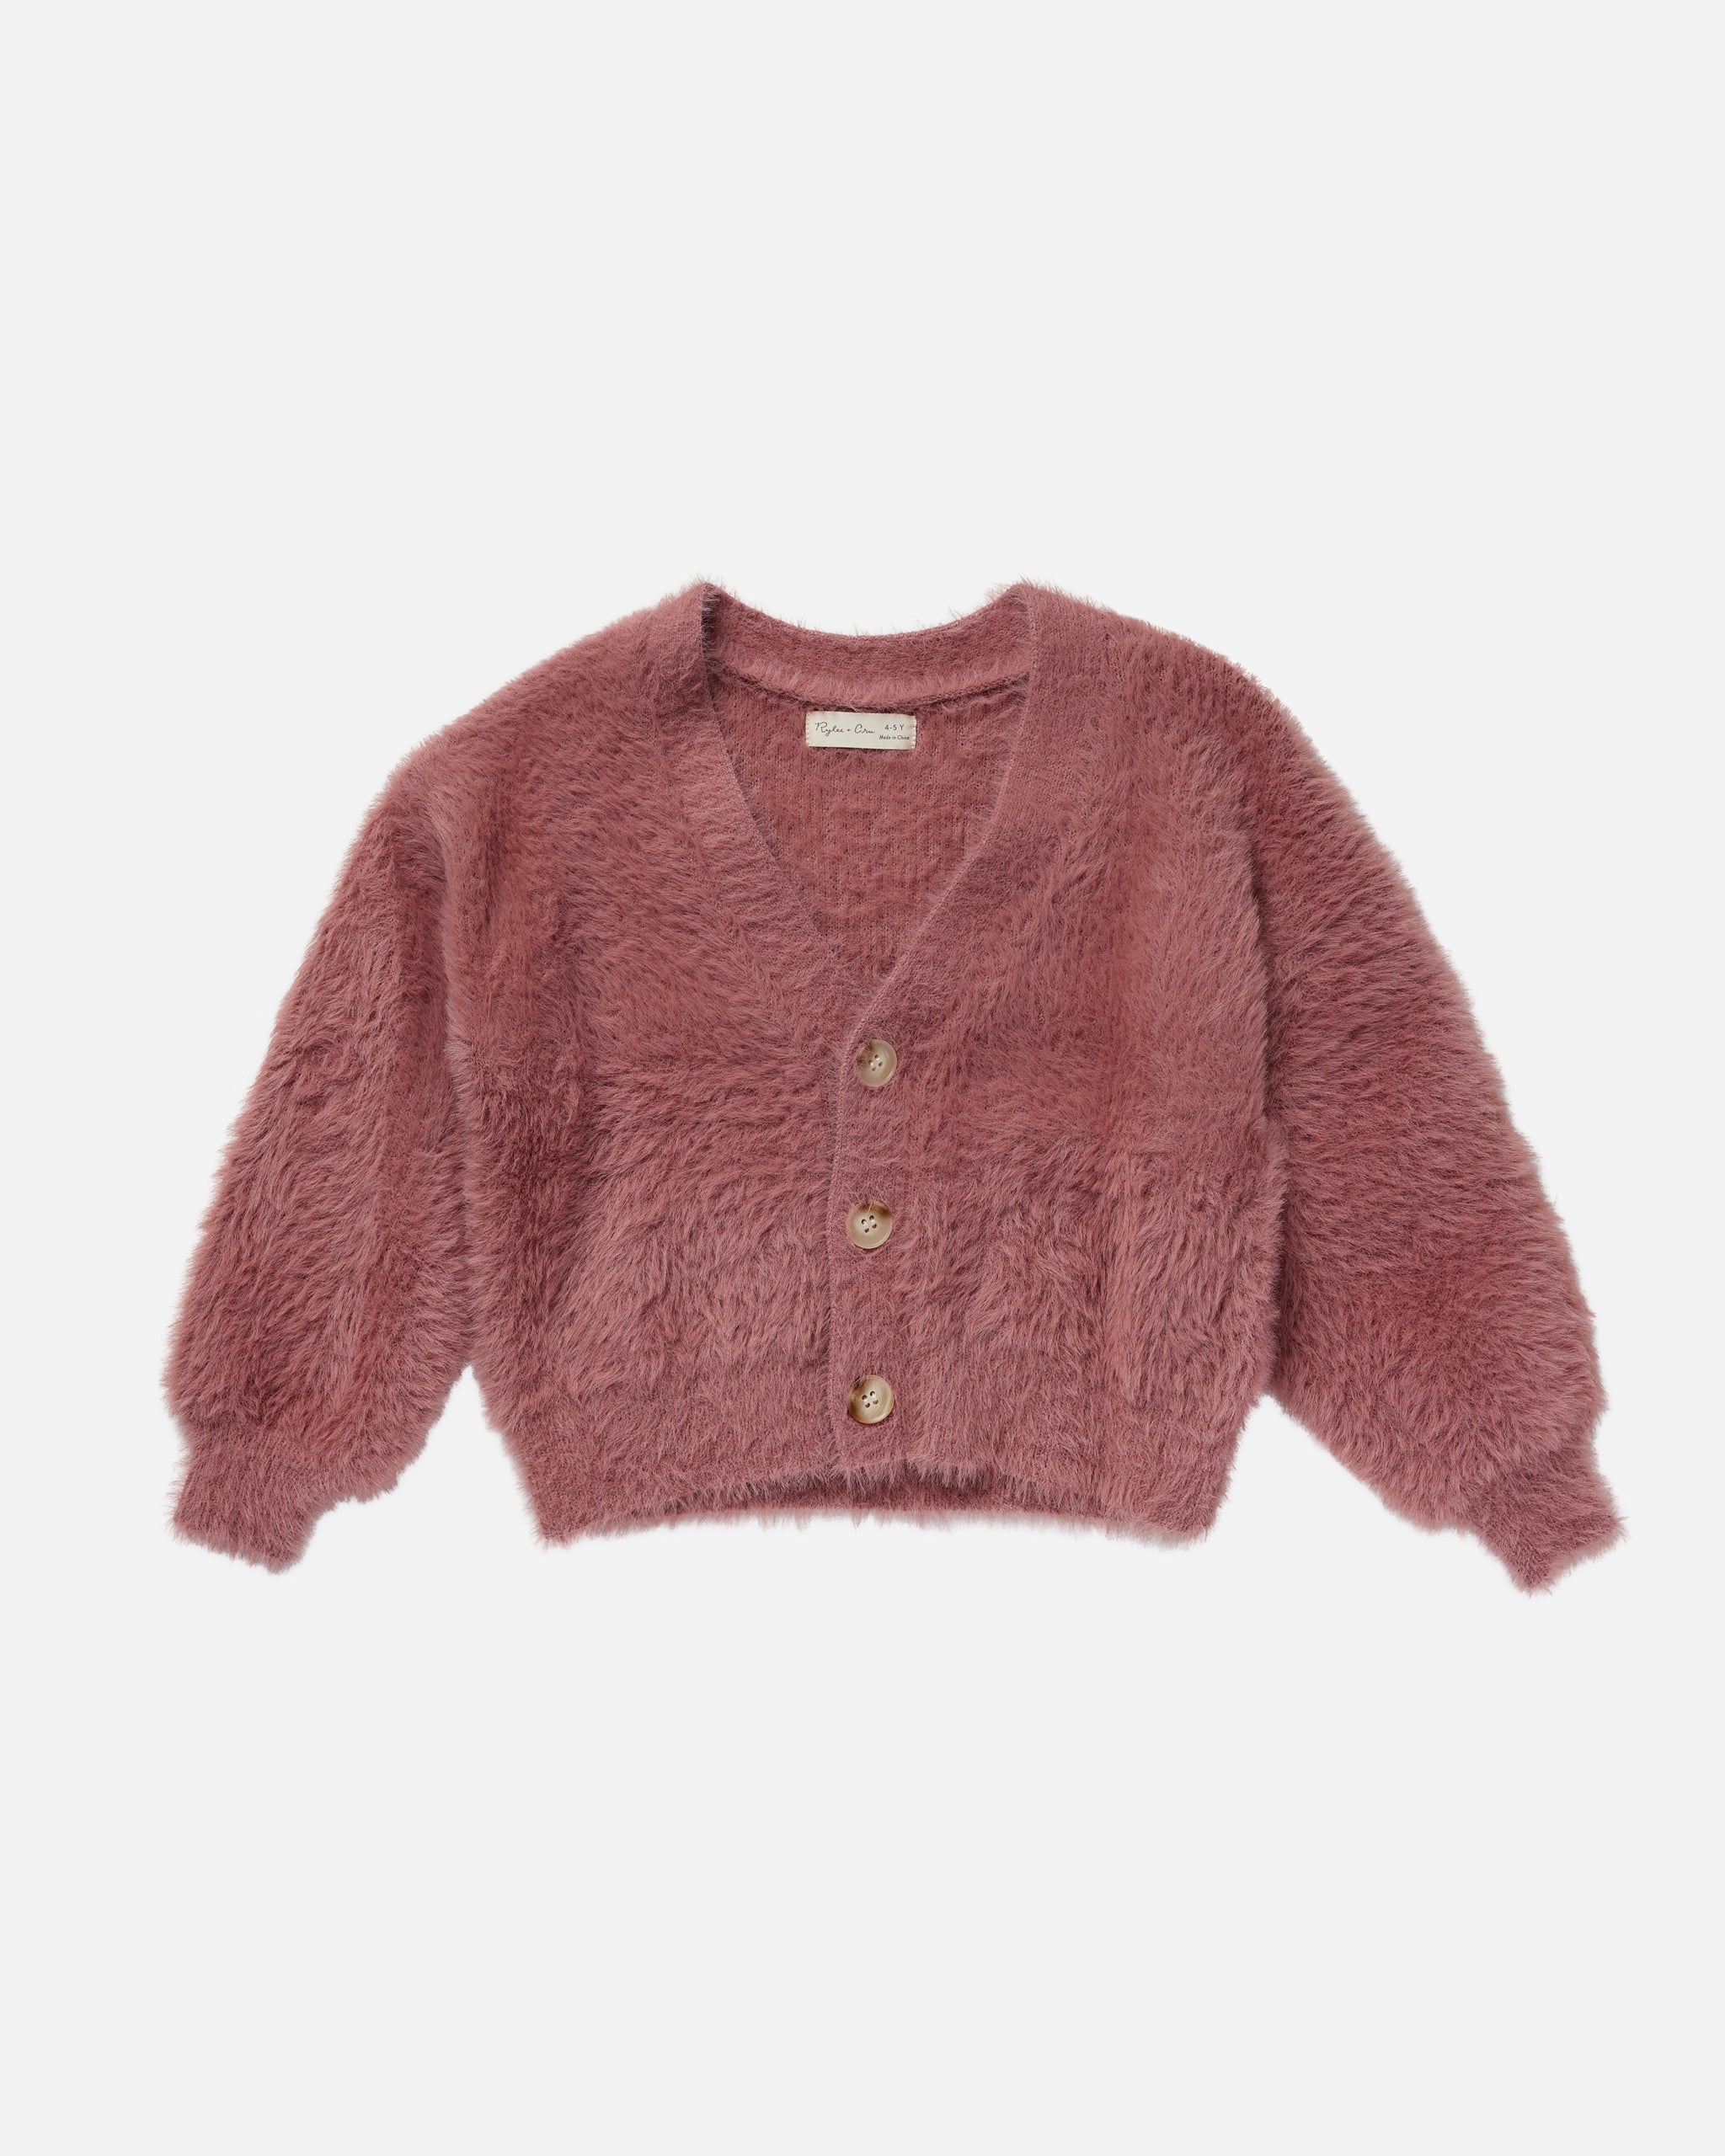 Boxy Crop Cardigan || Raspberry - Rylee + Cru | Kids Clothes | Trendy Baby Clothes | Modern Infant Outfits |